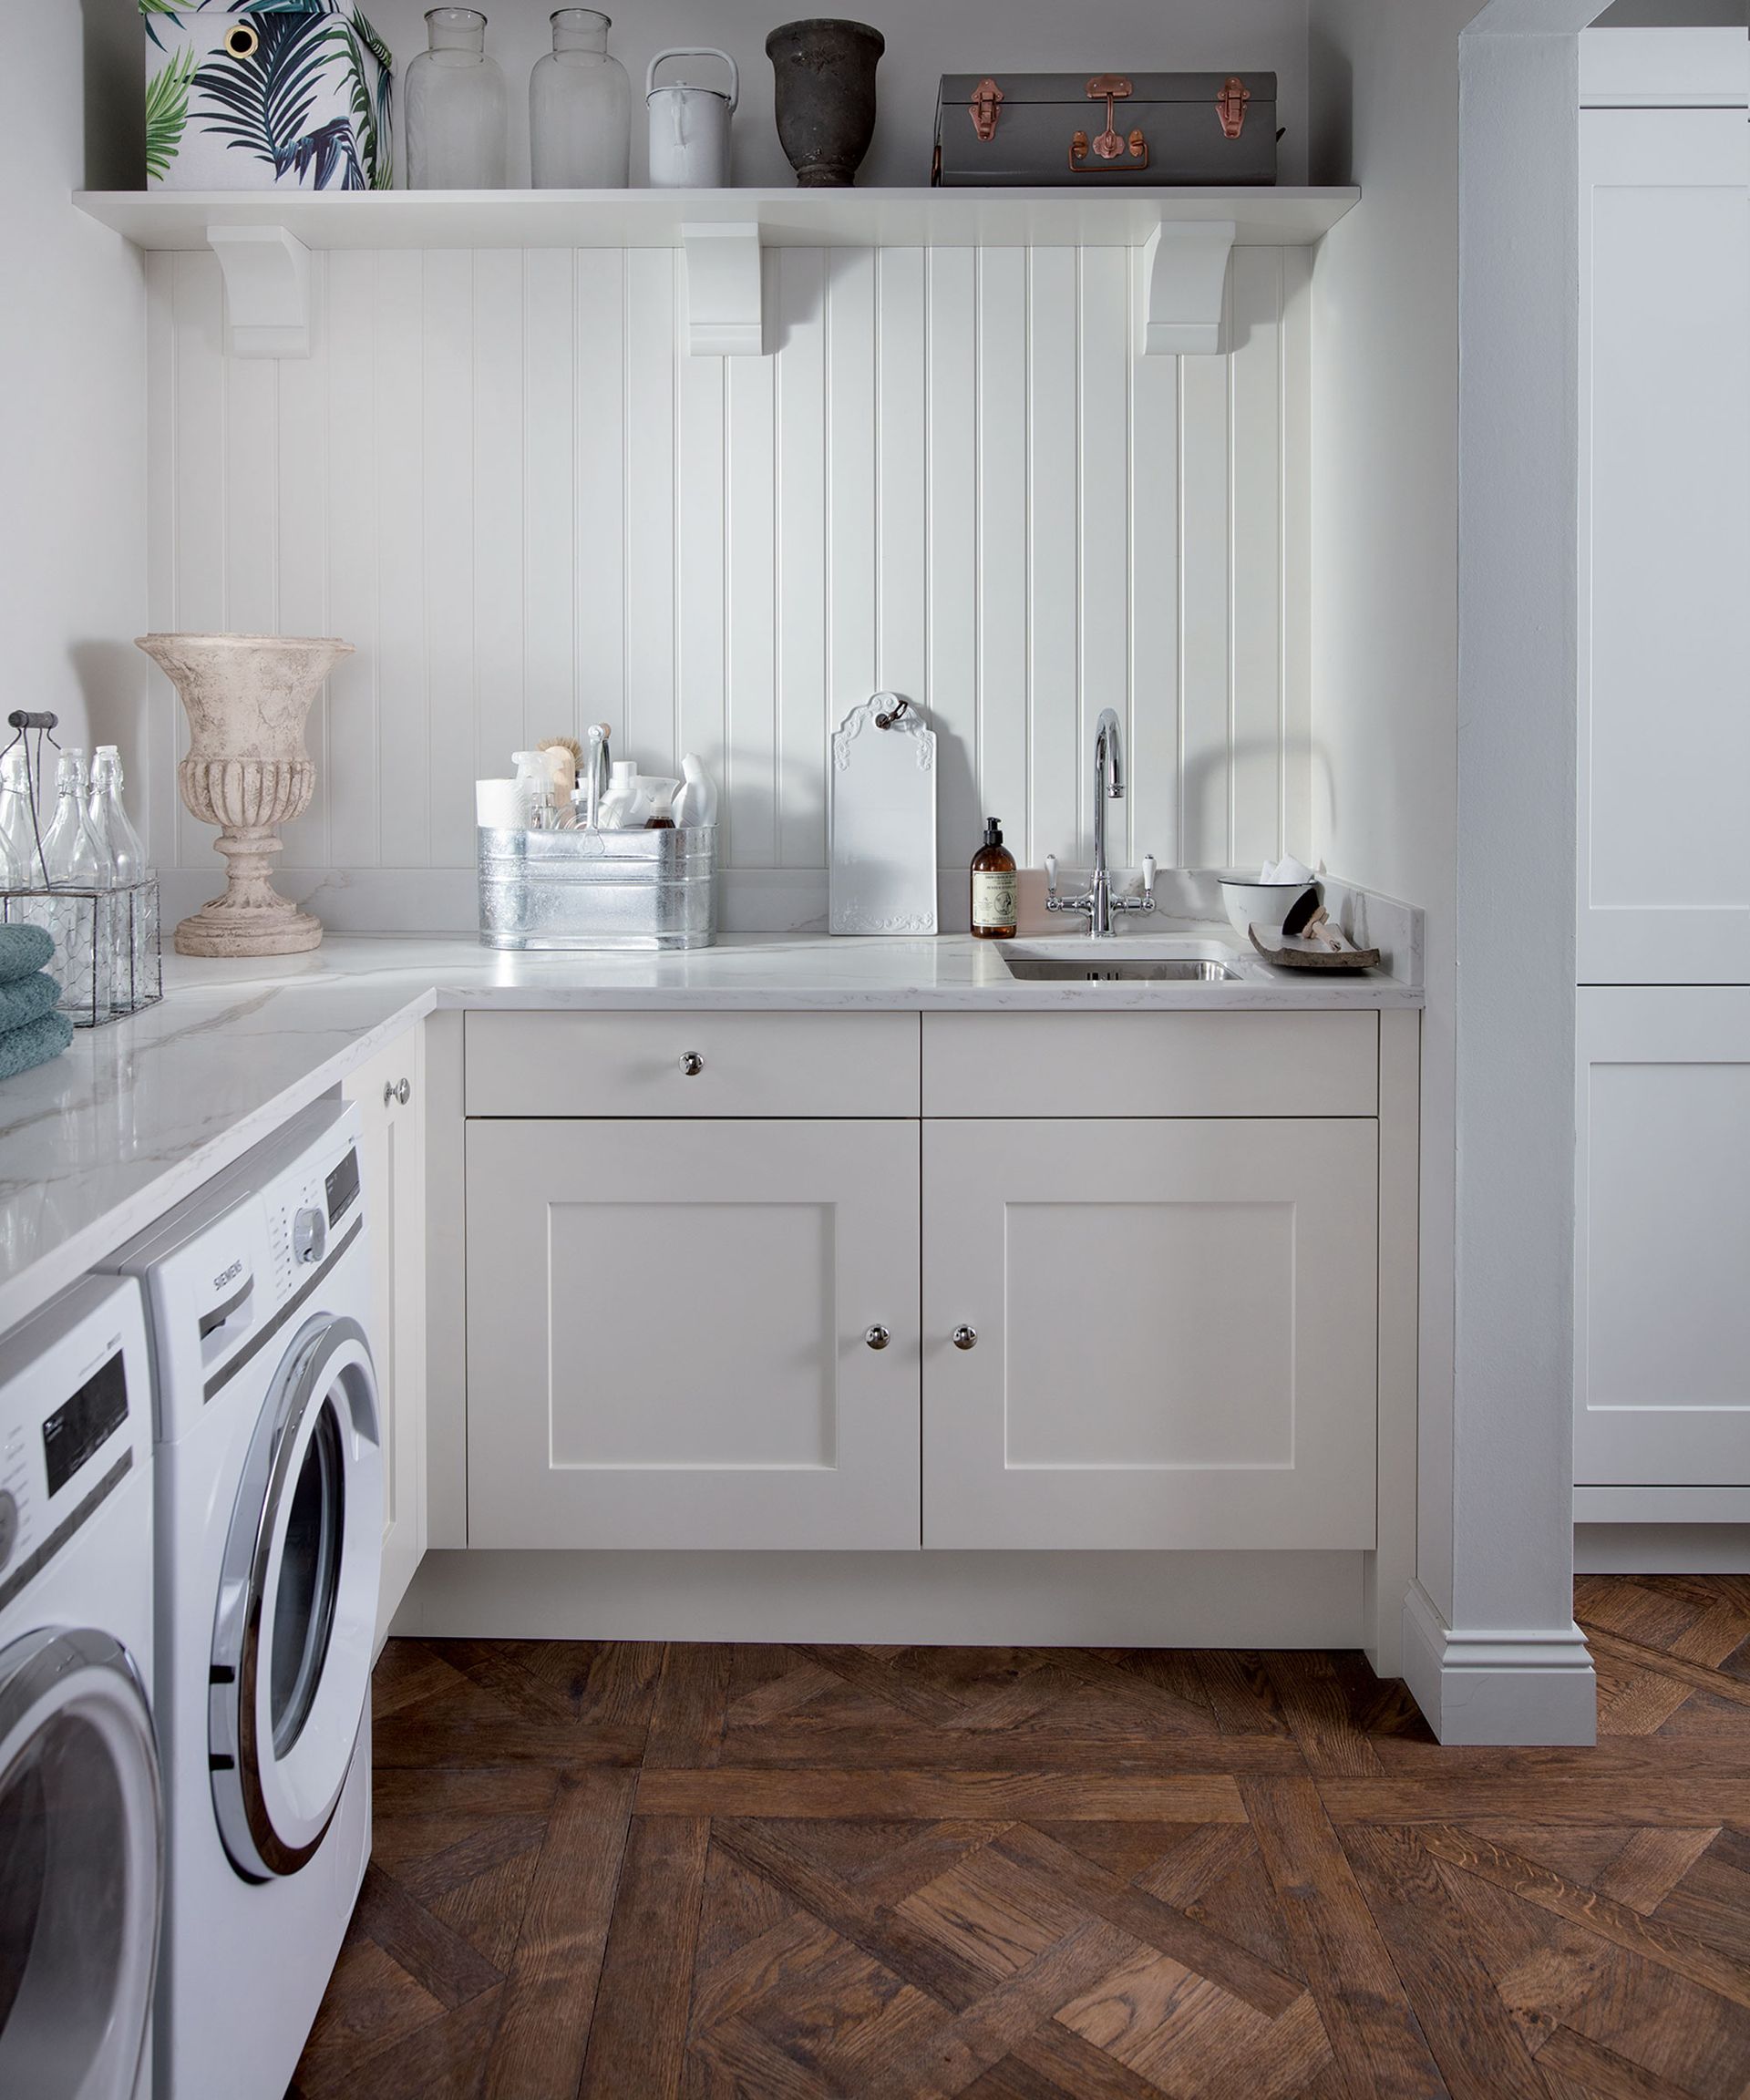 30 laundry room ideas for snug and sizeable spaces | Real Homes